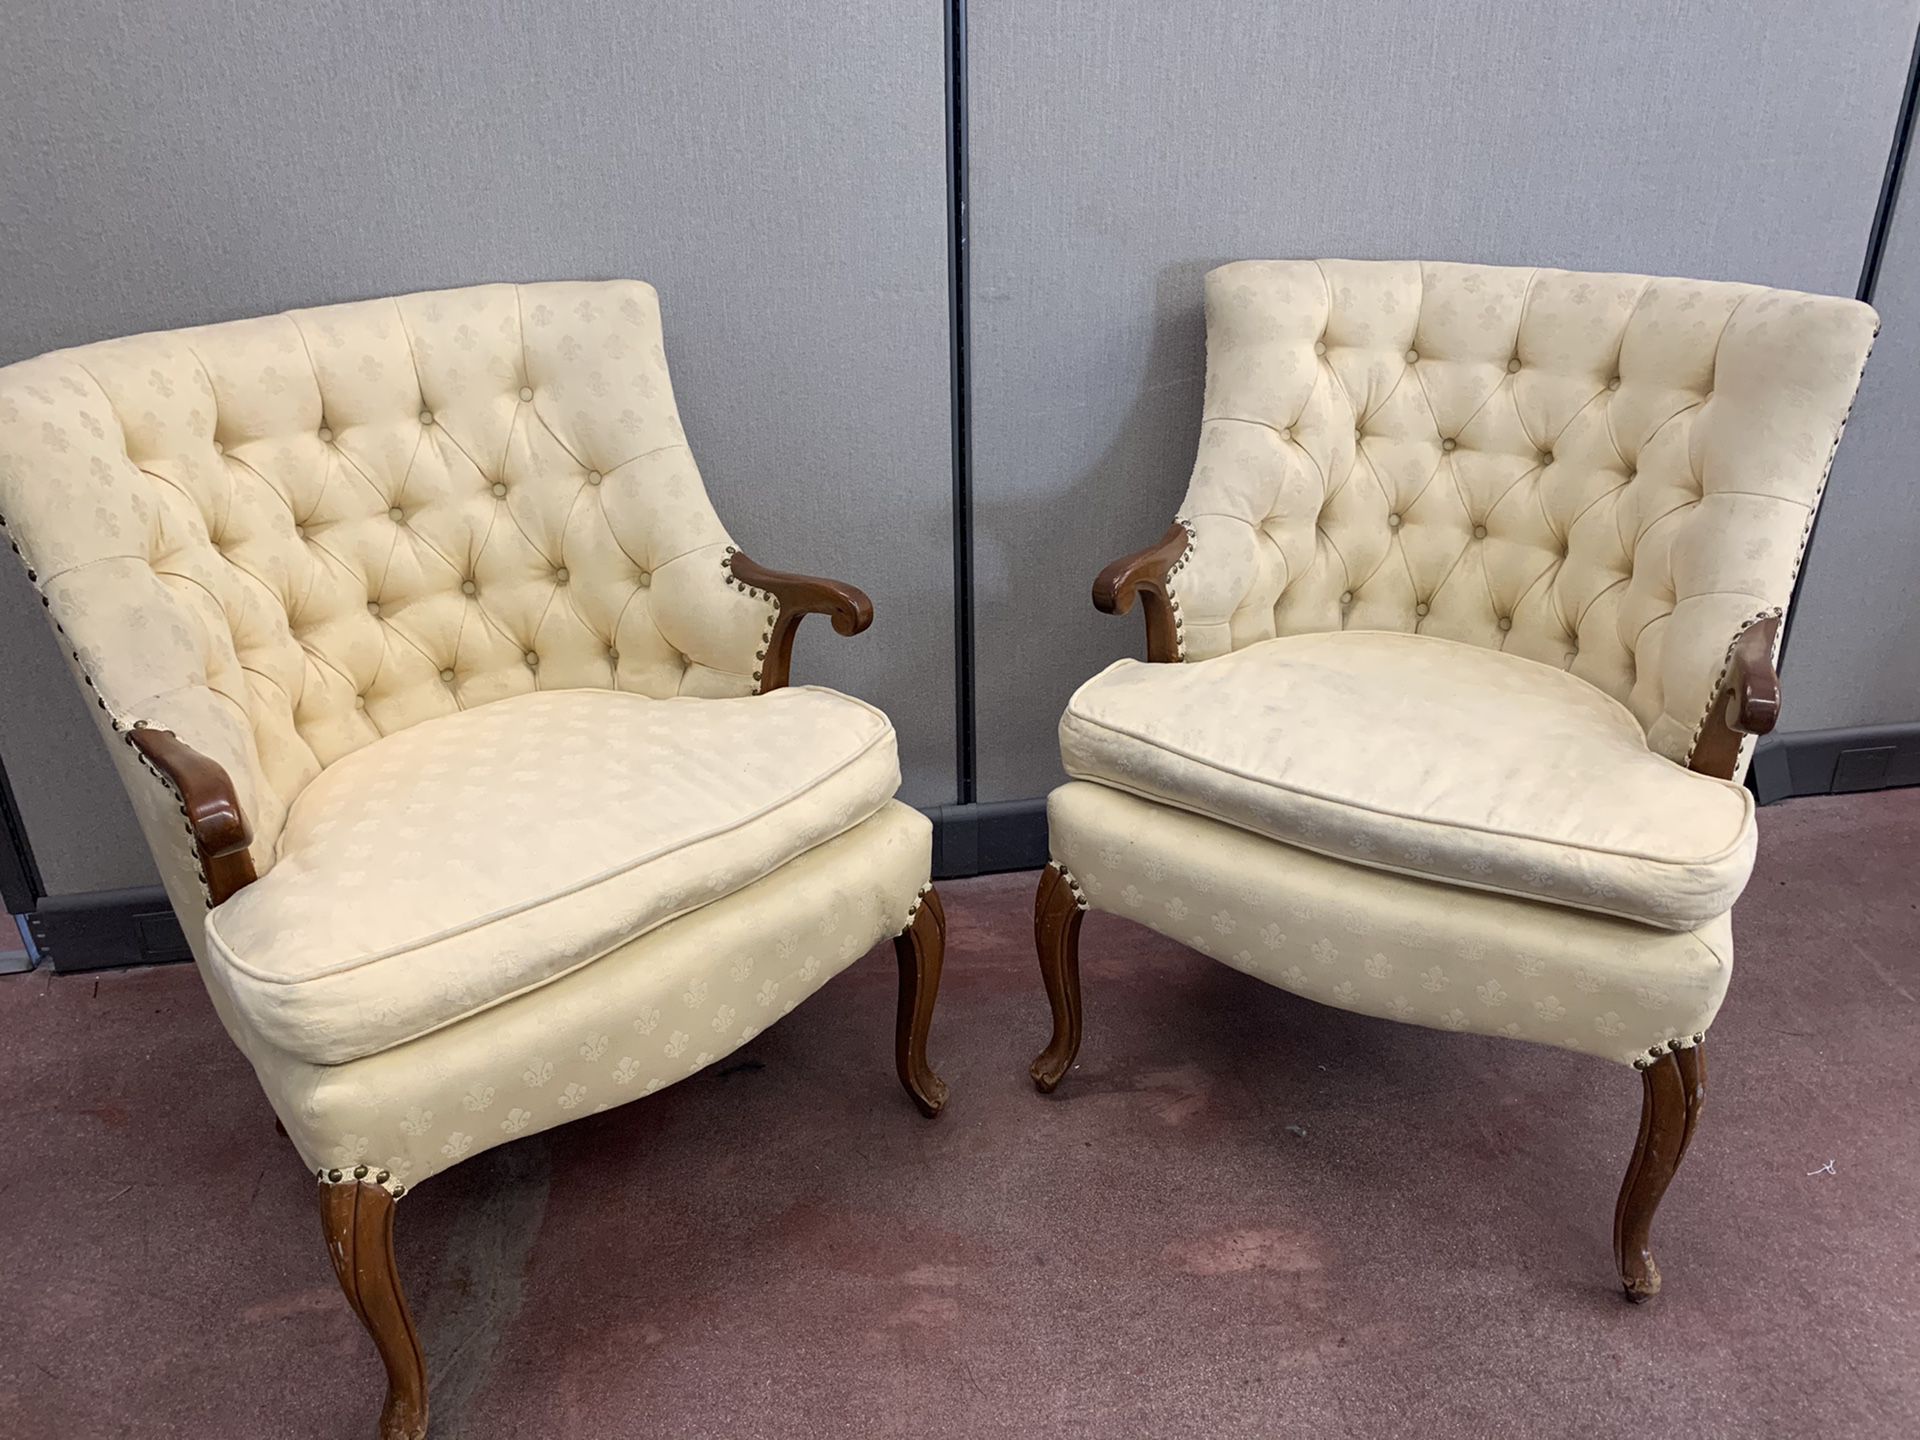 Matching antique chairs